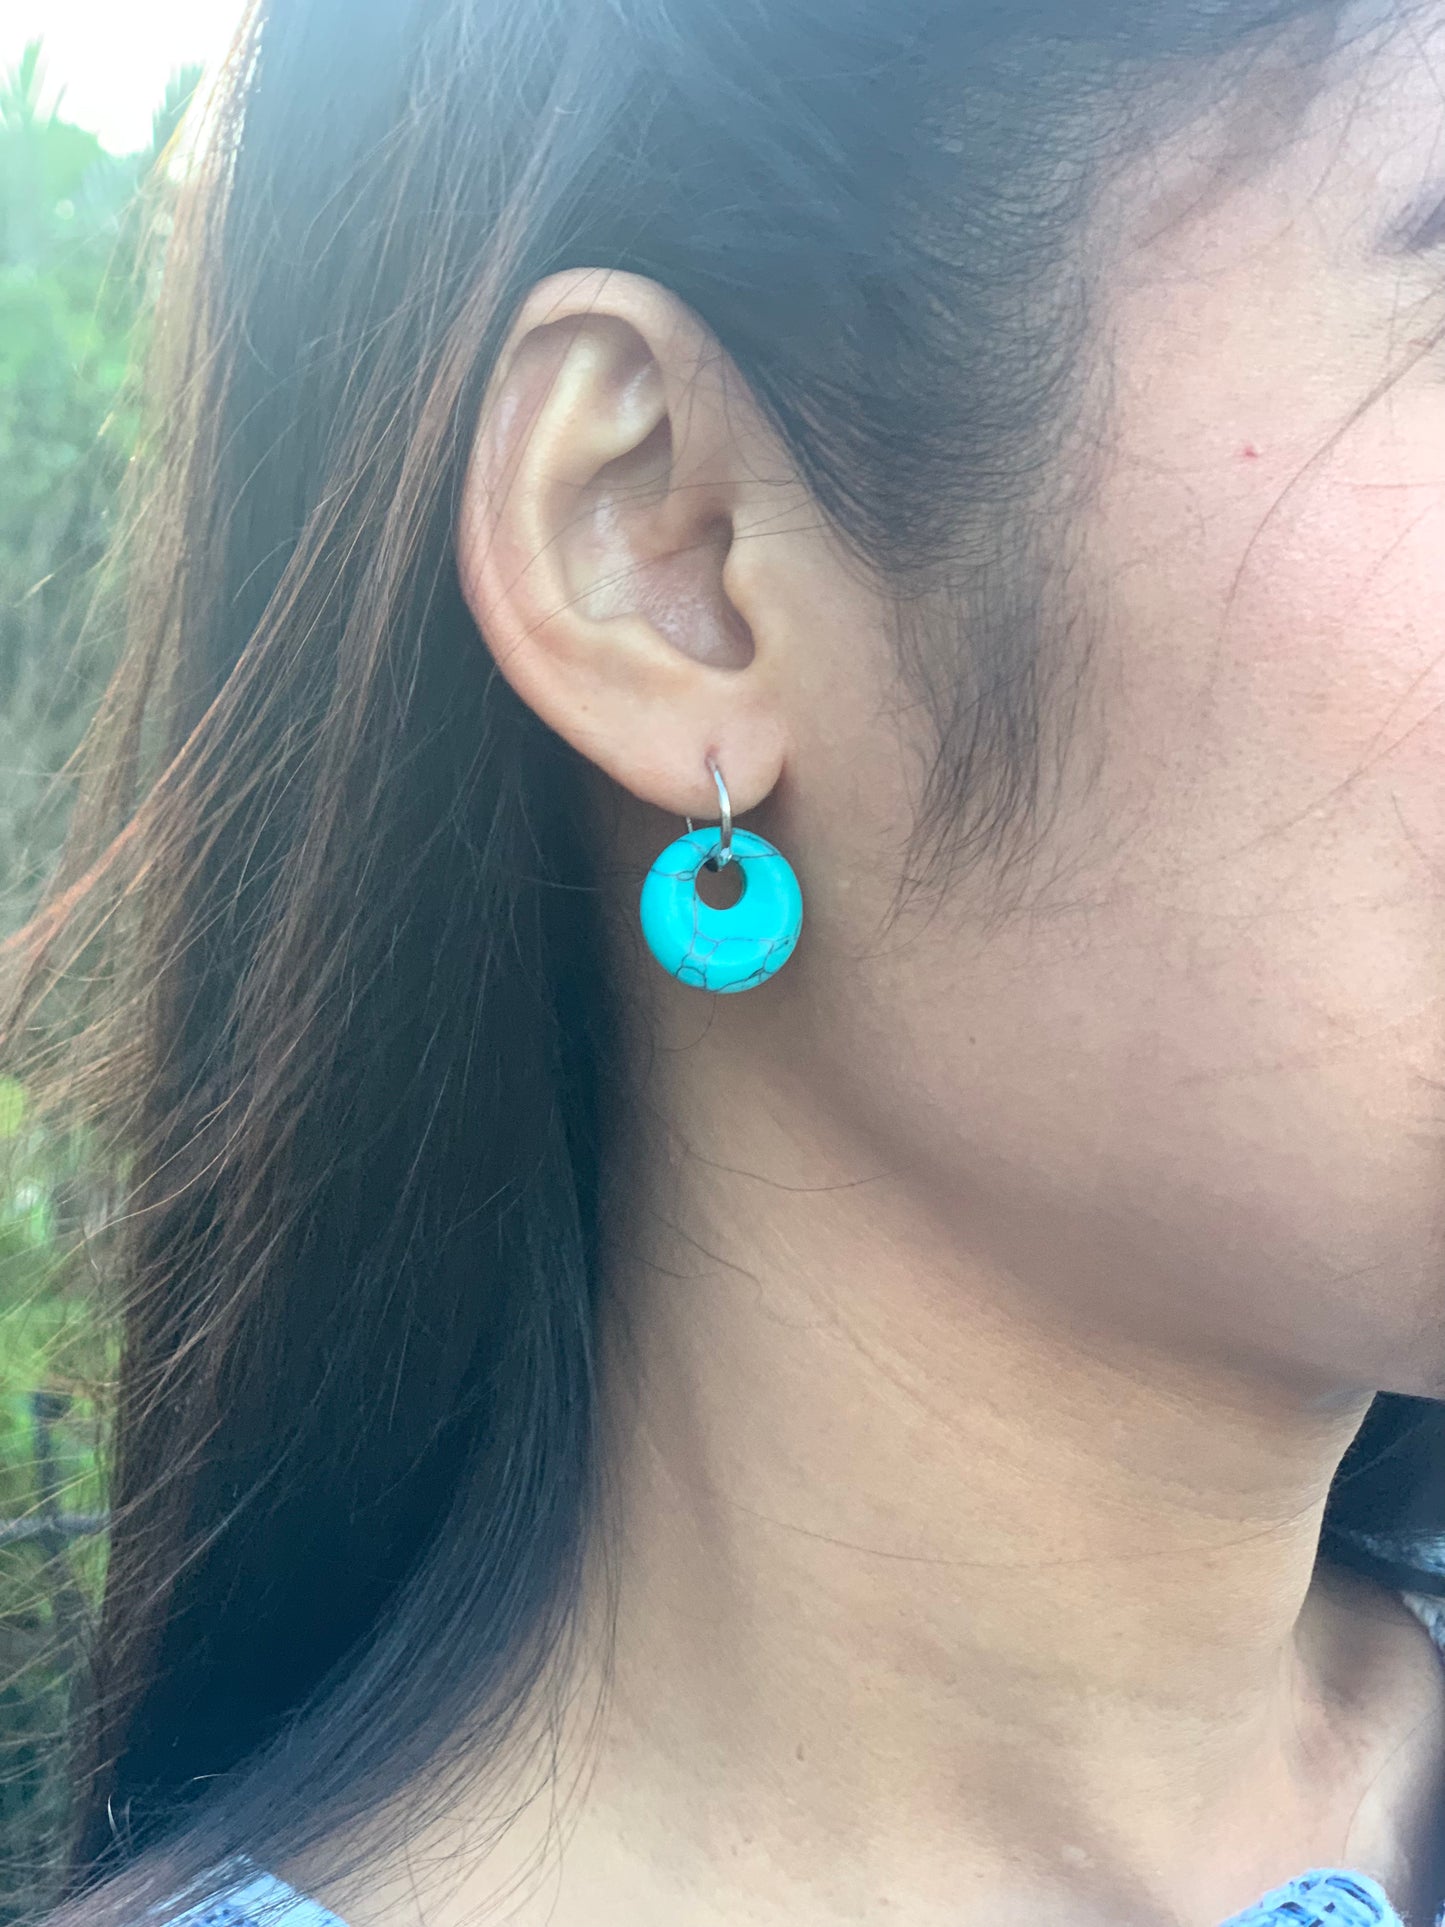 Turquoise Style Sterling Silver Earrings